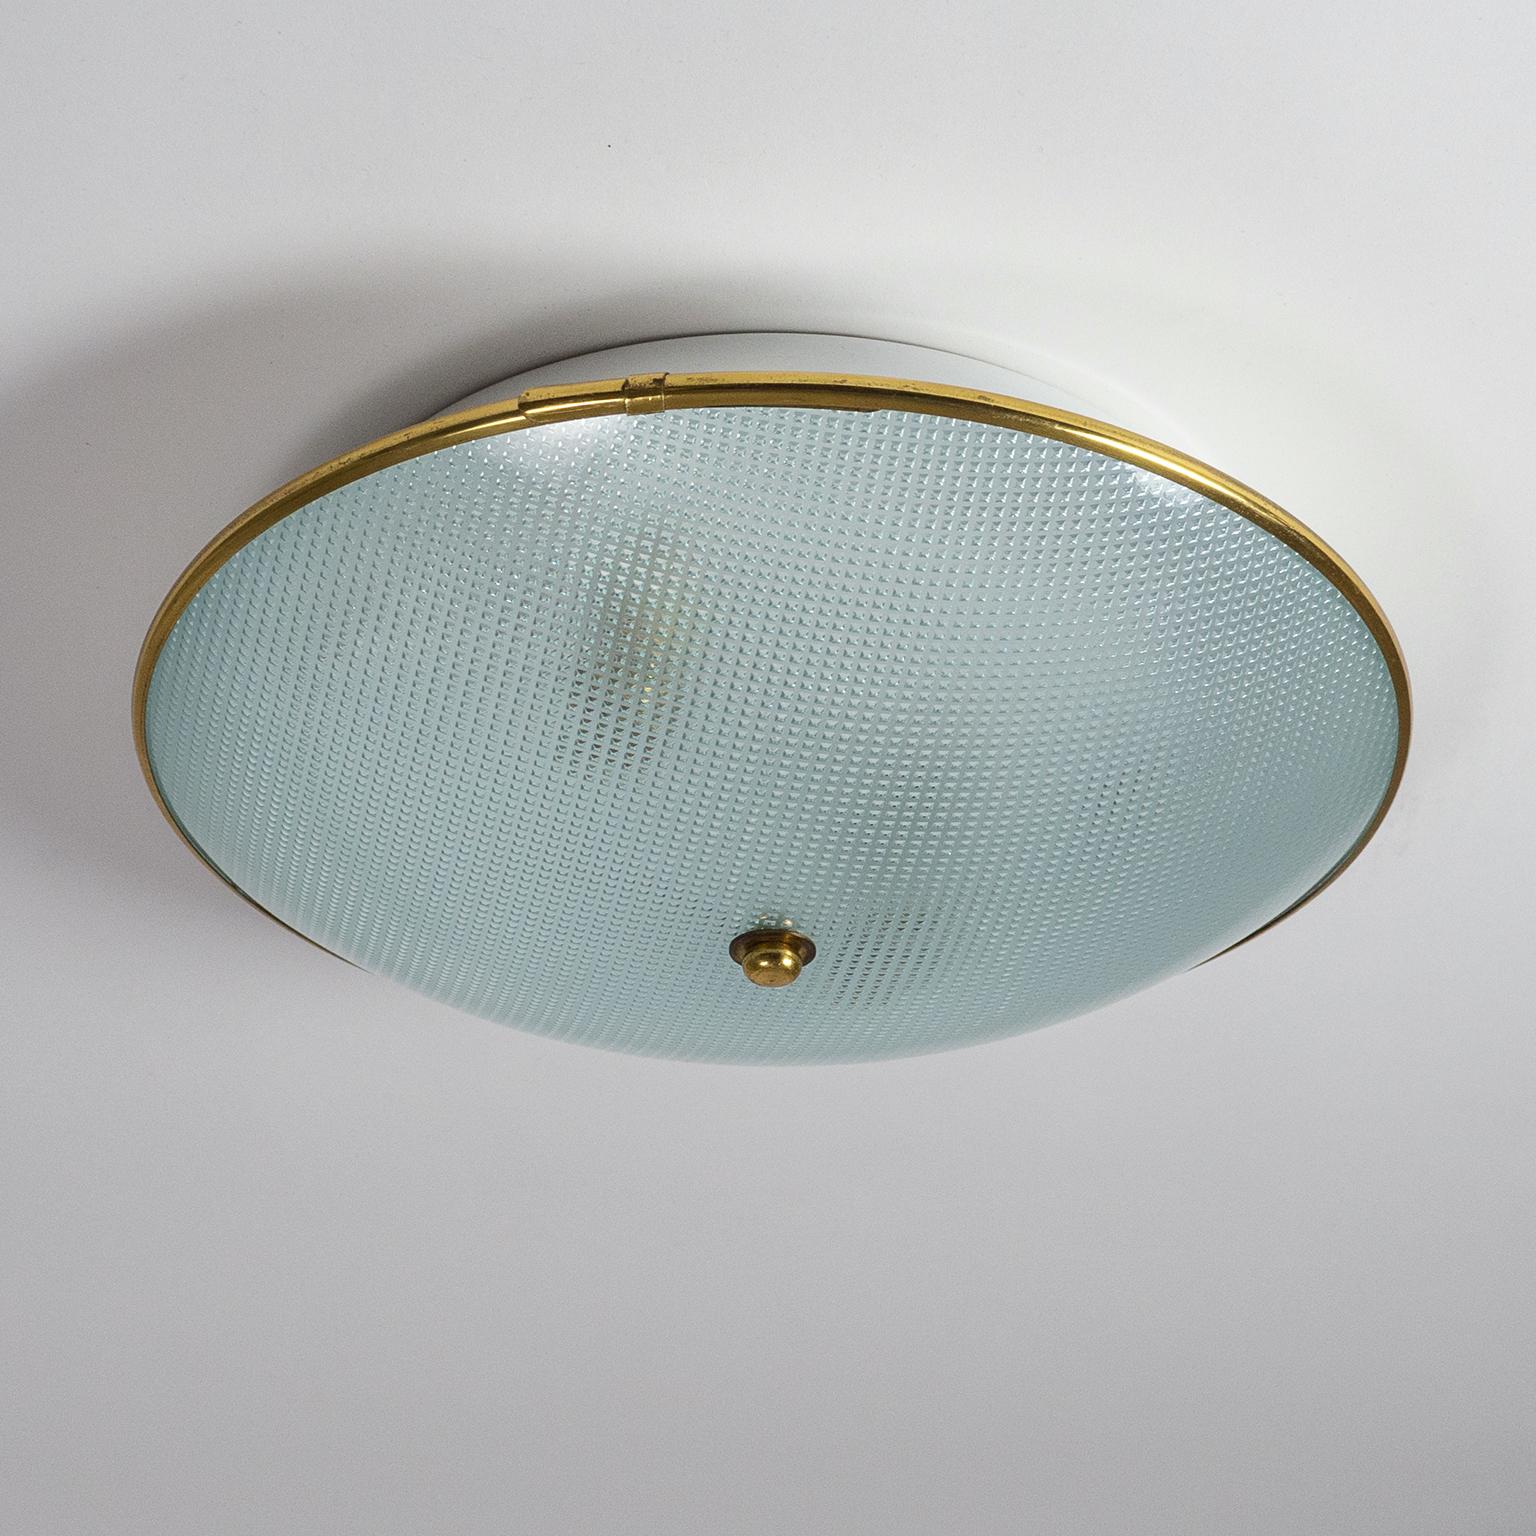 Aluminum 1950s Italian Saucer Ceiling or Wall Lights, Textured Glass and Brass